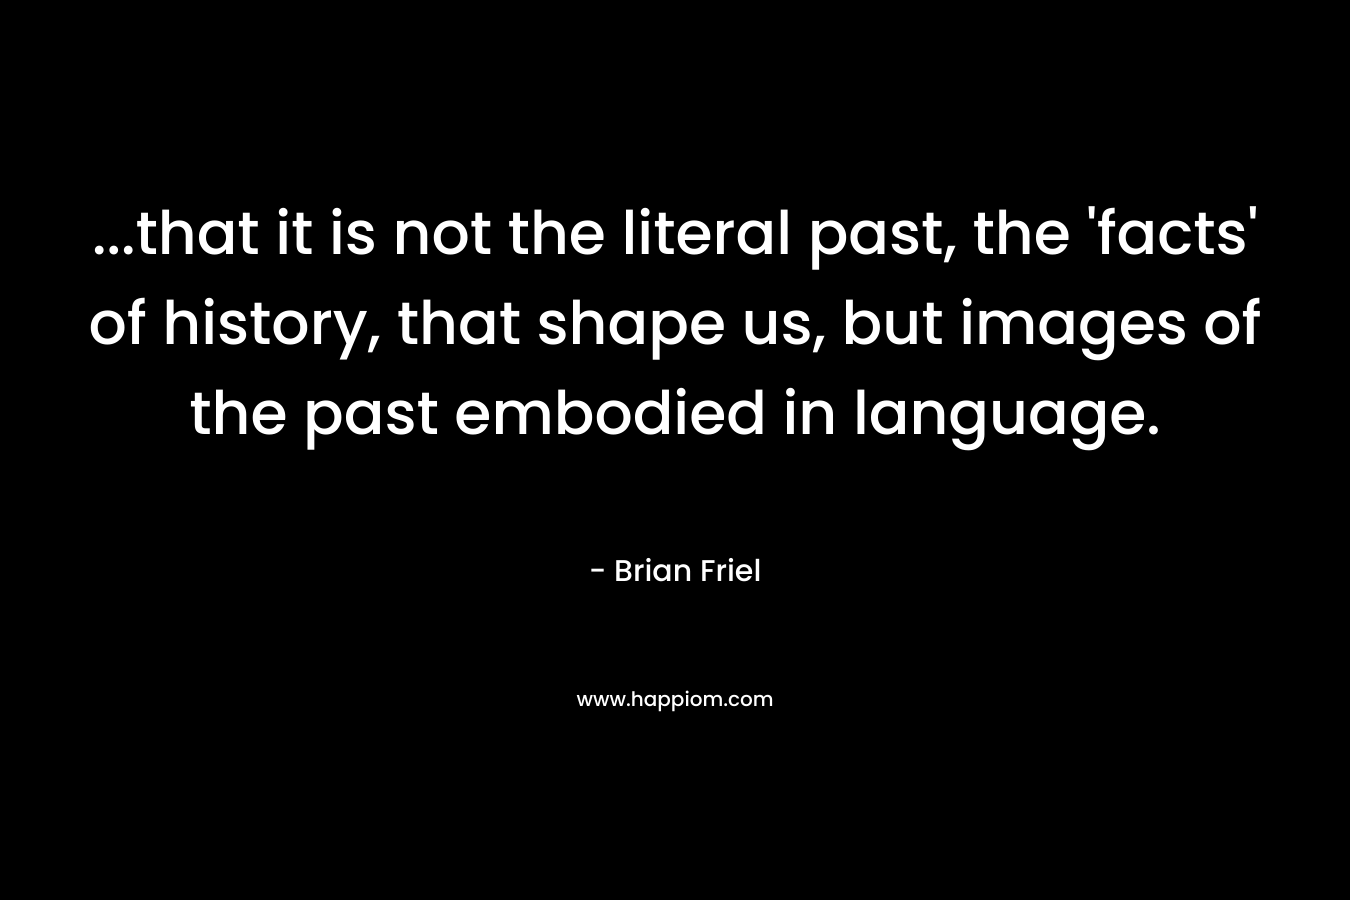 …that it is not the literal past, the ‘facts’ of history, that shape us, but images of the past embodied in language. – Brian Friel